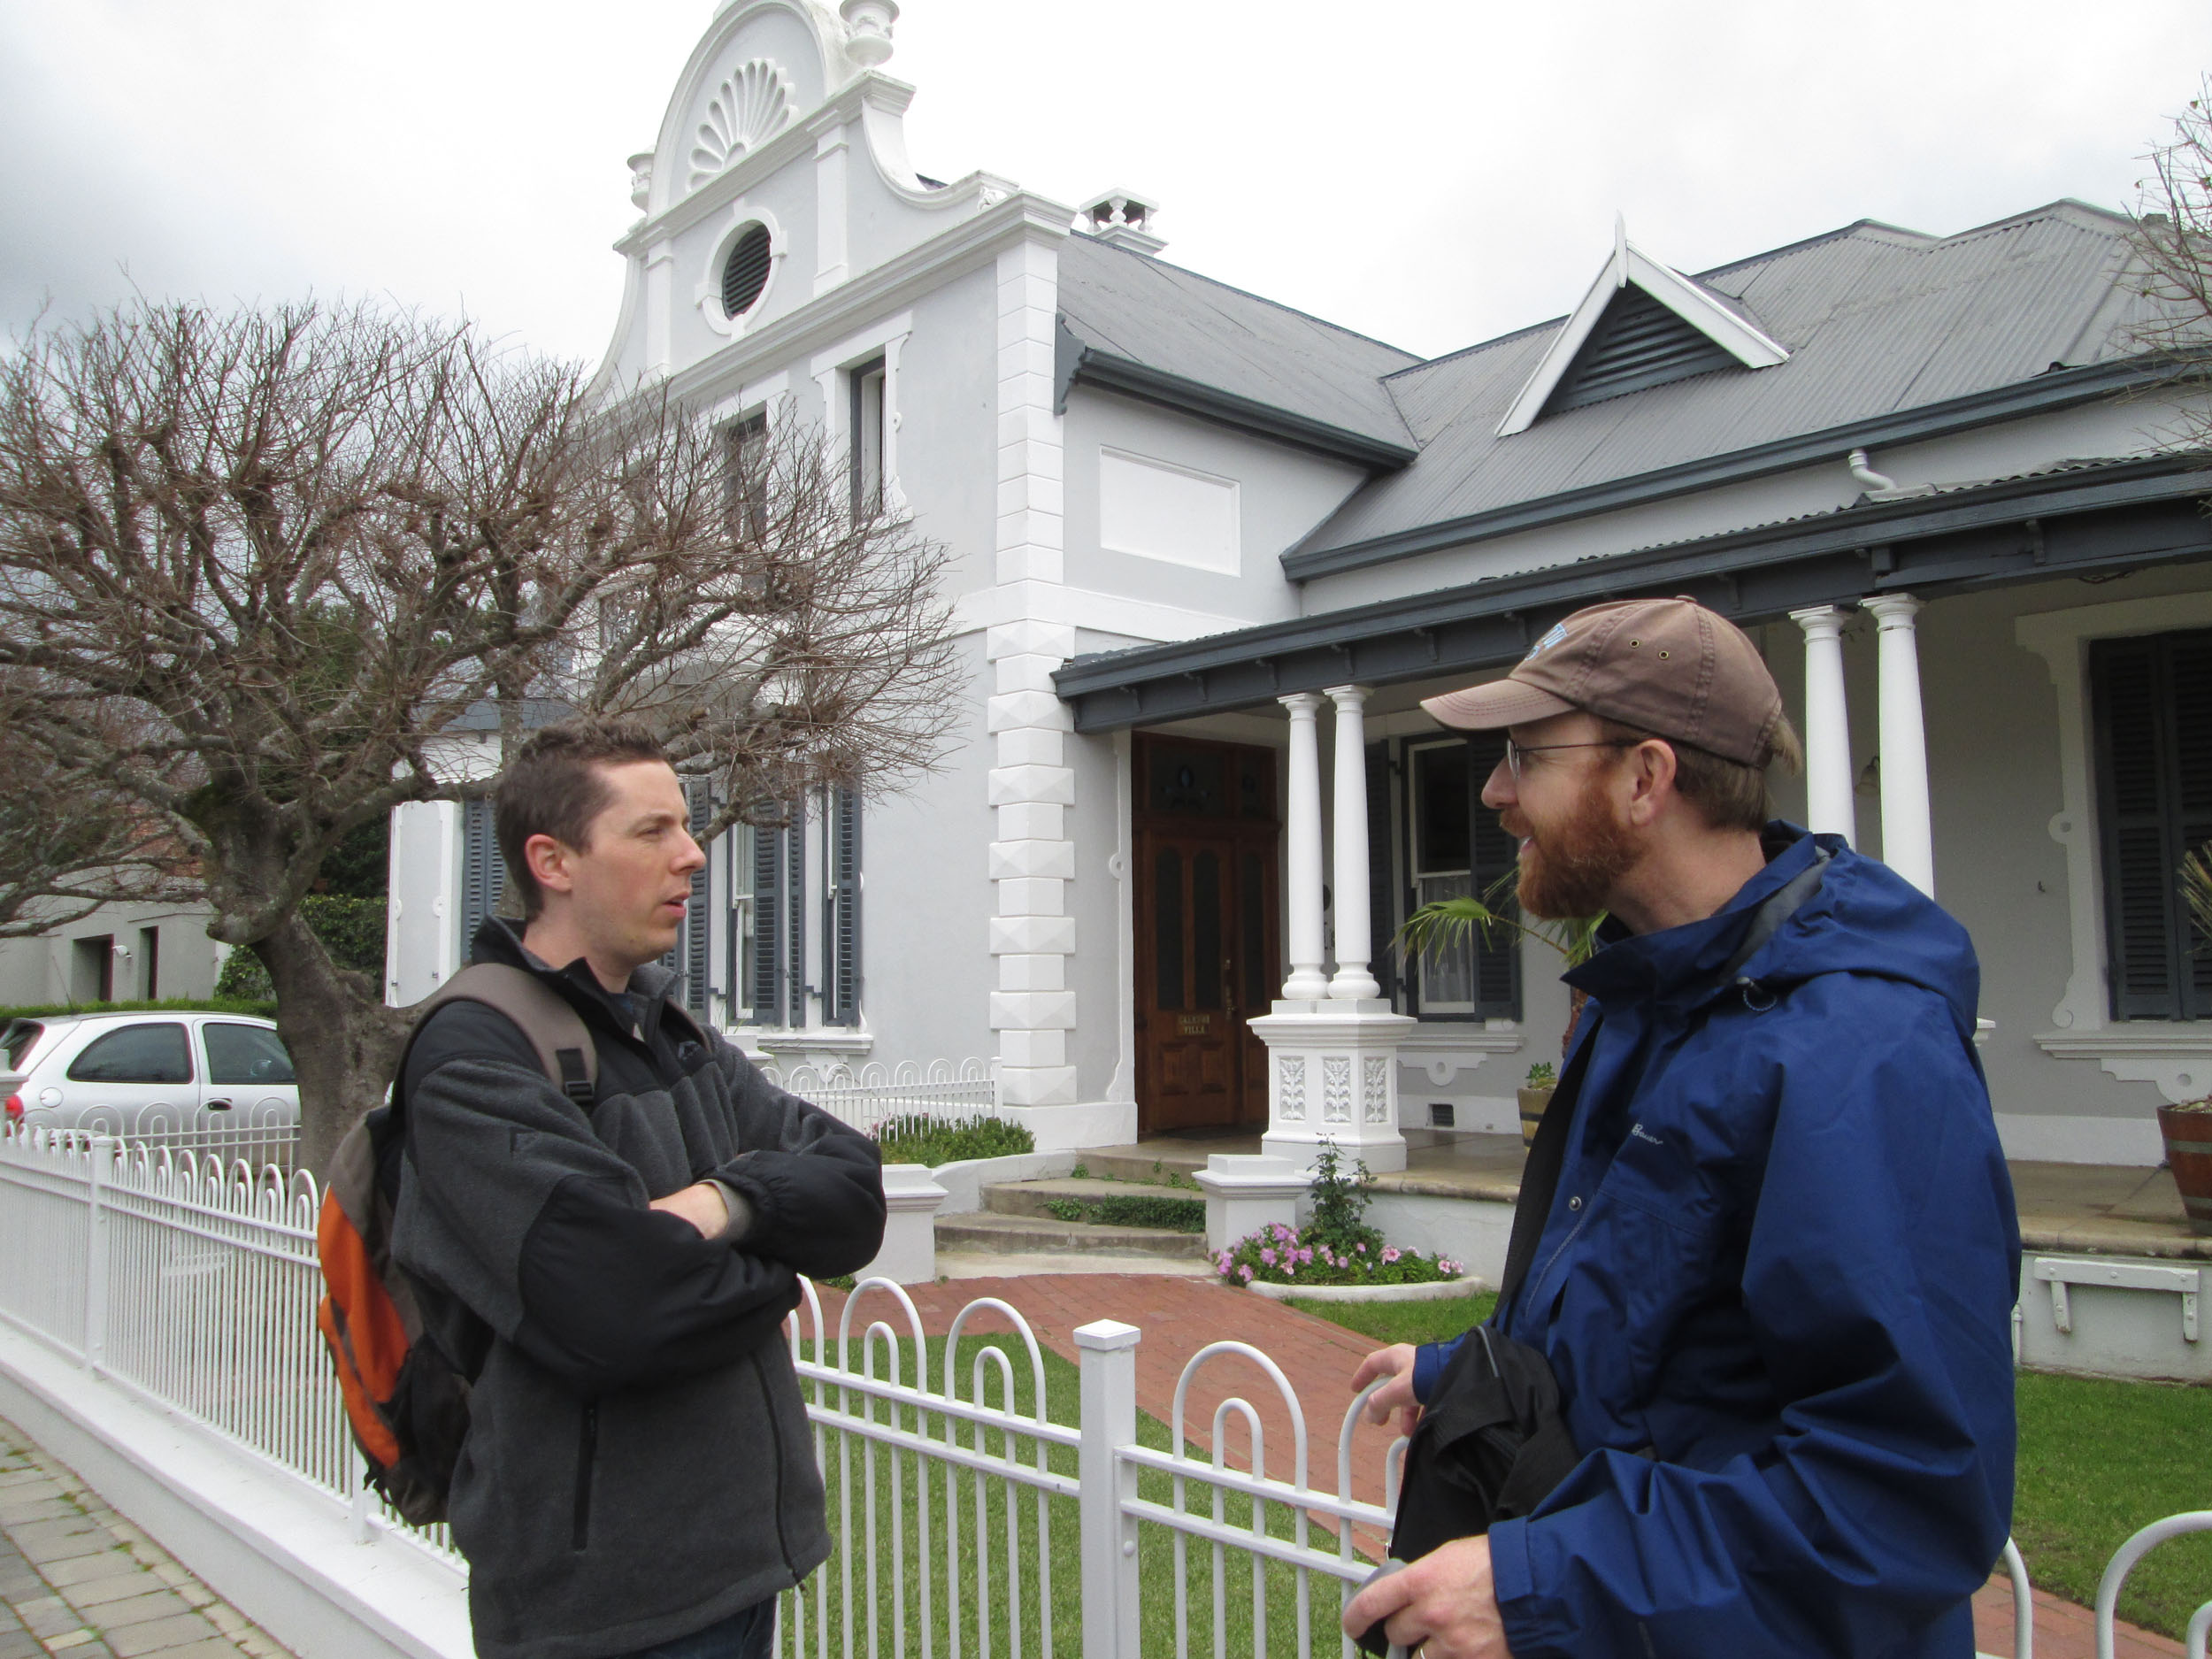 Jared McDonald and Adrian S. Wisnicki in Stellenbosch, South Africa, 2013. Copyright Adrian S. Wisnicki. Creative Commons Attribution-NonCommercial 3.0 Unported (https://creativecommons.org/licenses/by-nc/3.0/).